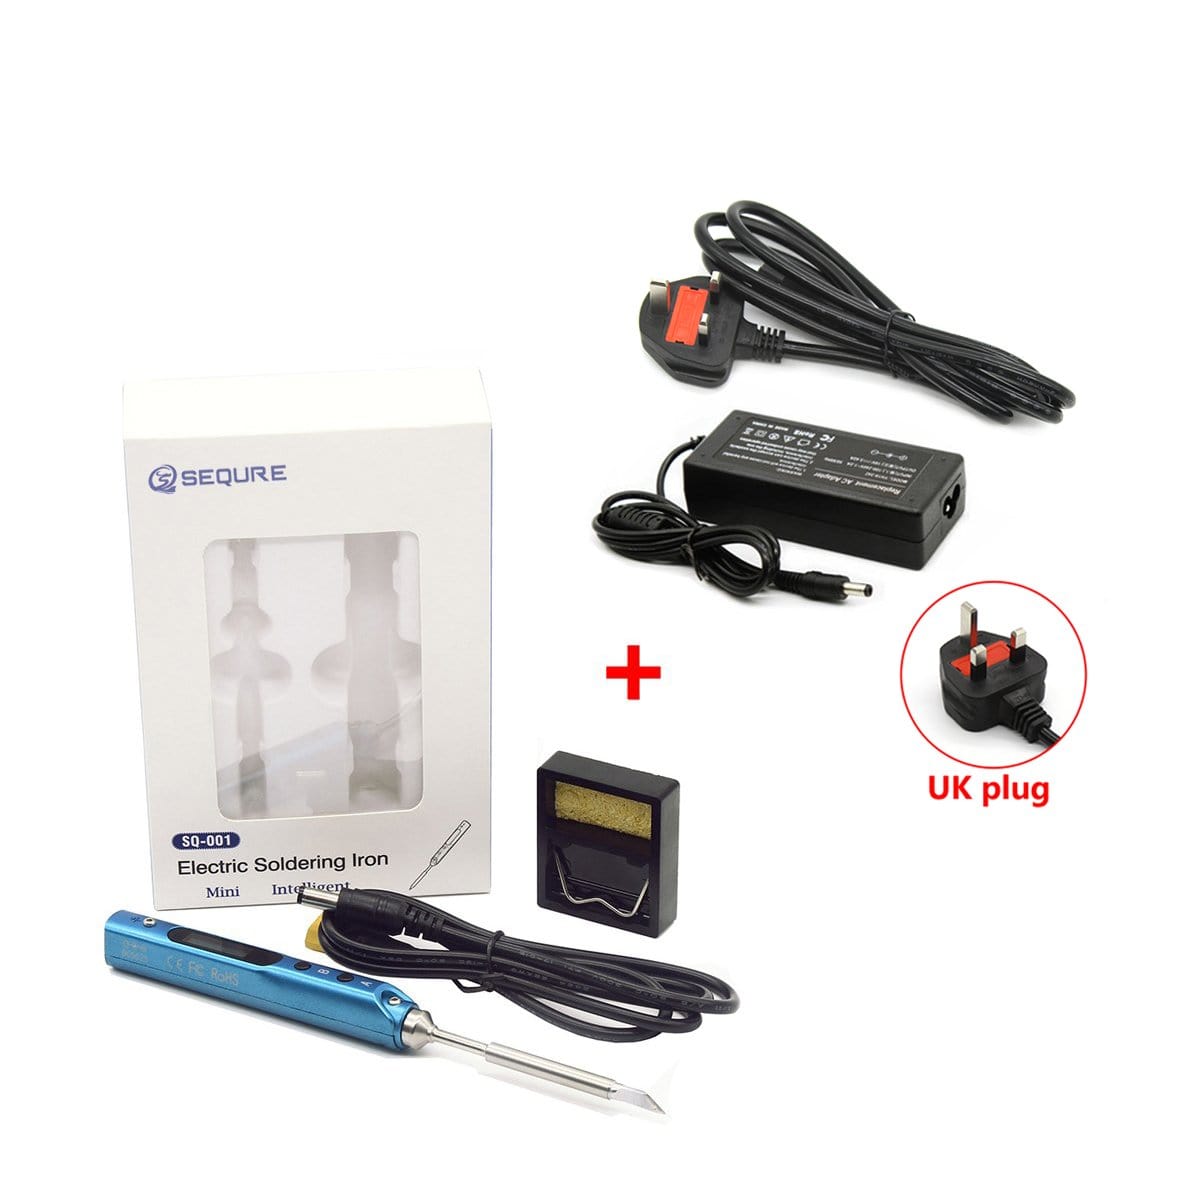 SEQURE SQ-001 MINI Soldering Iron Kit with Power Supply Adapter